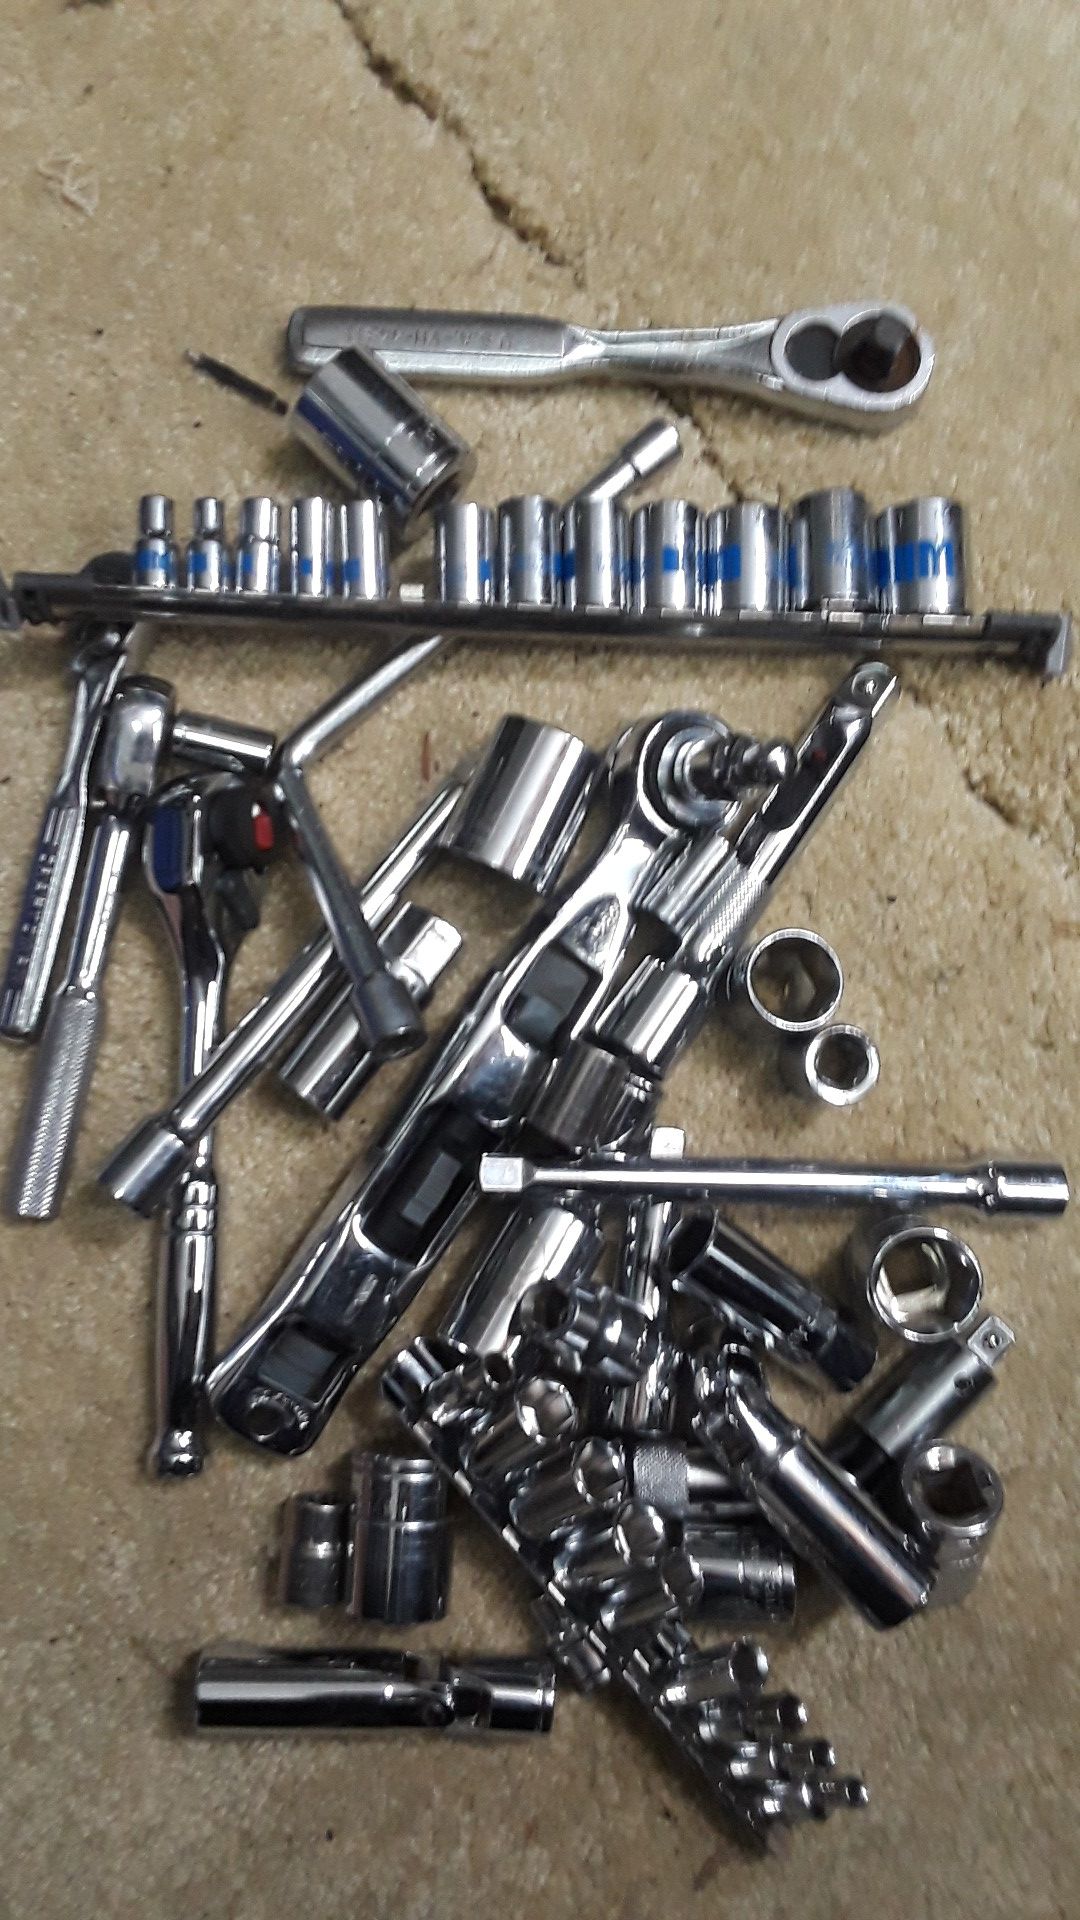 Sockets and socket wrenches